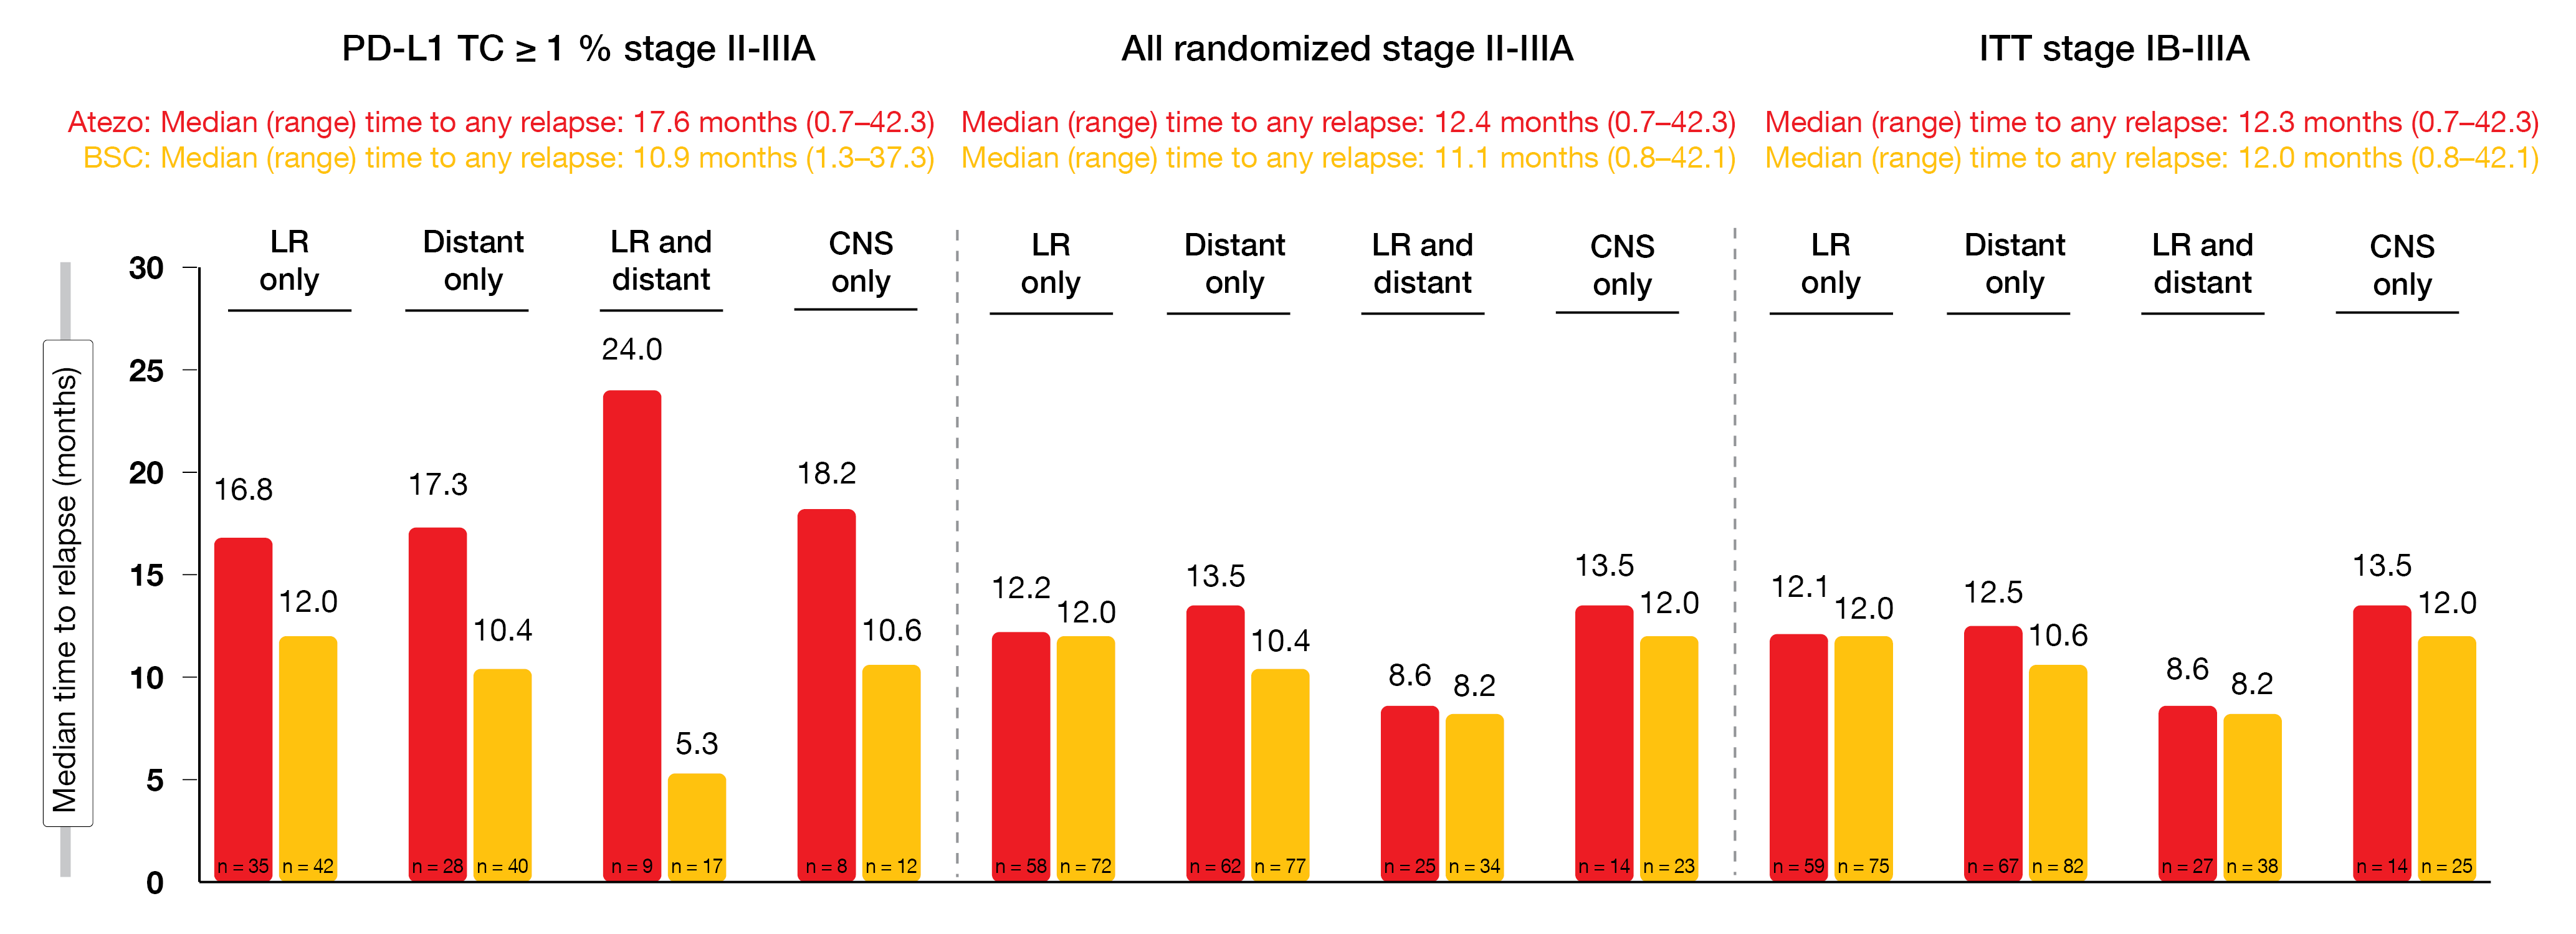 Figure 1: Time from randomization to relapse for the PD-L1 TC ≥ 1 % stage II-IIIA, all randomized stage II-IIIA, and ITT stage IB-IIIA populations included in IMpower010. LR, locoregional; CNS, central nervous system